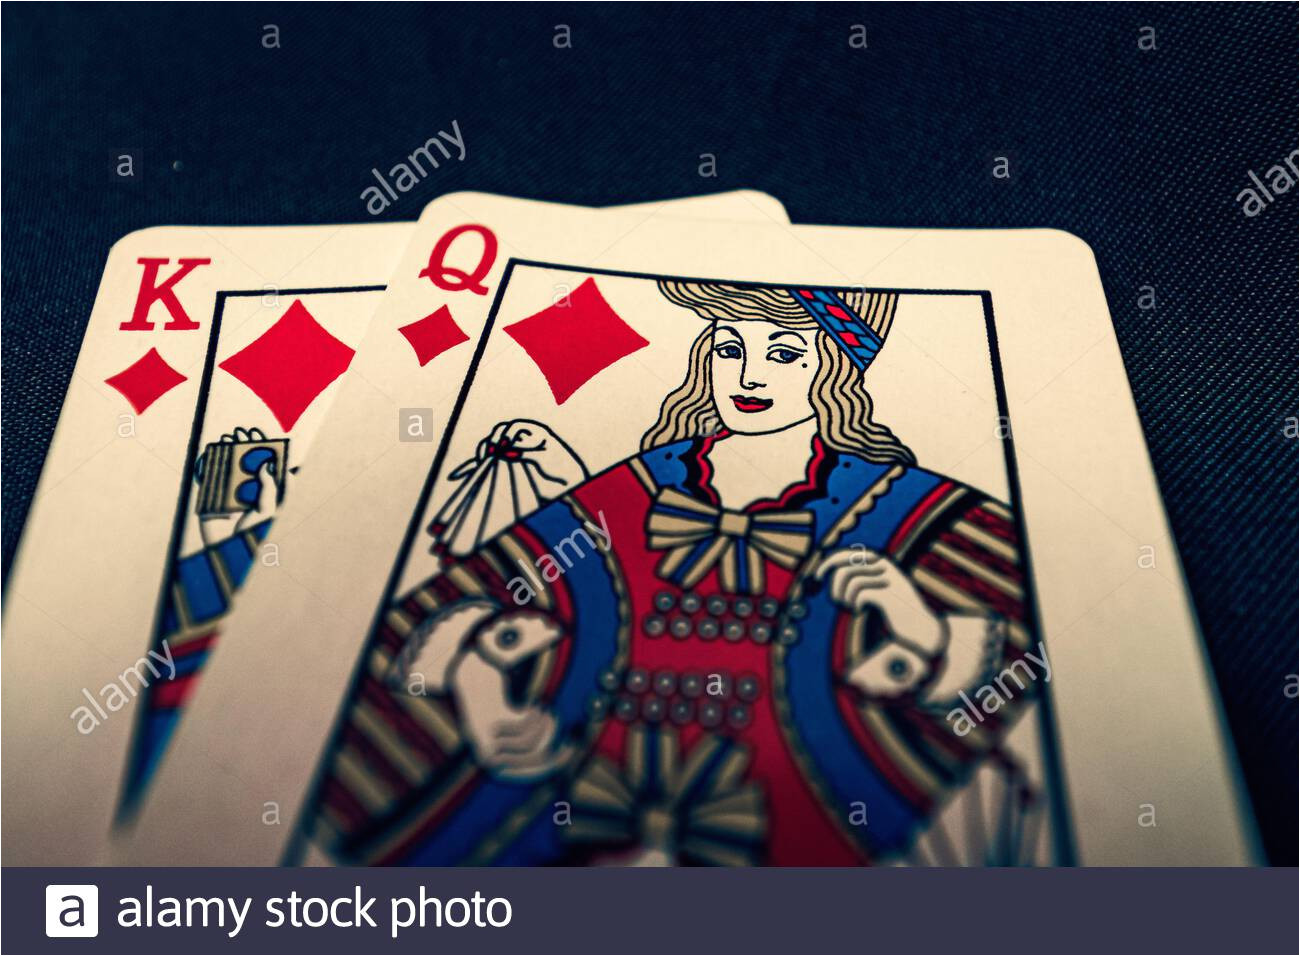 king and queen of diamonds playing cards on black background 2abpfd7 jpg